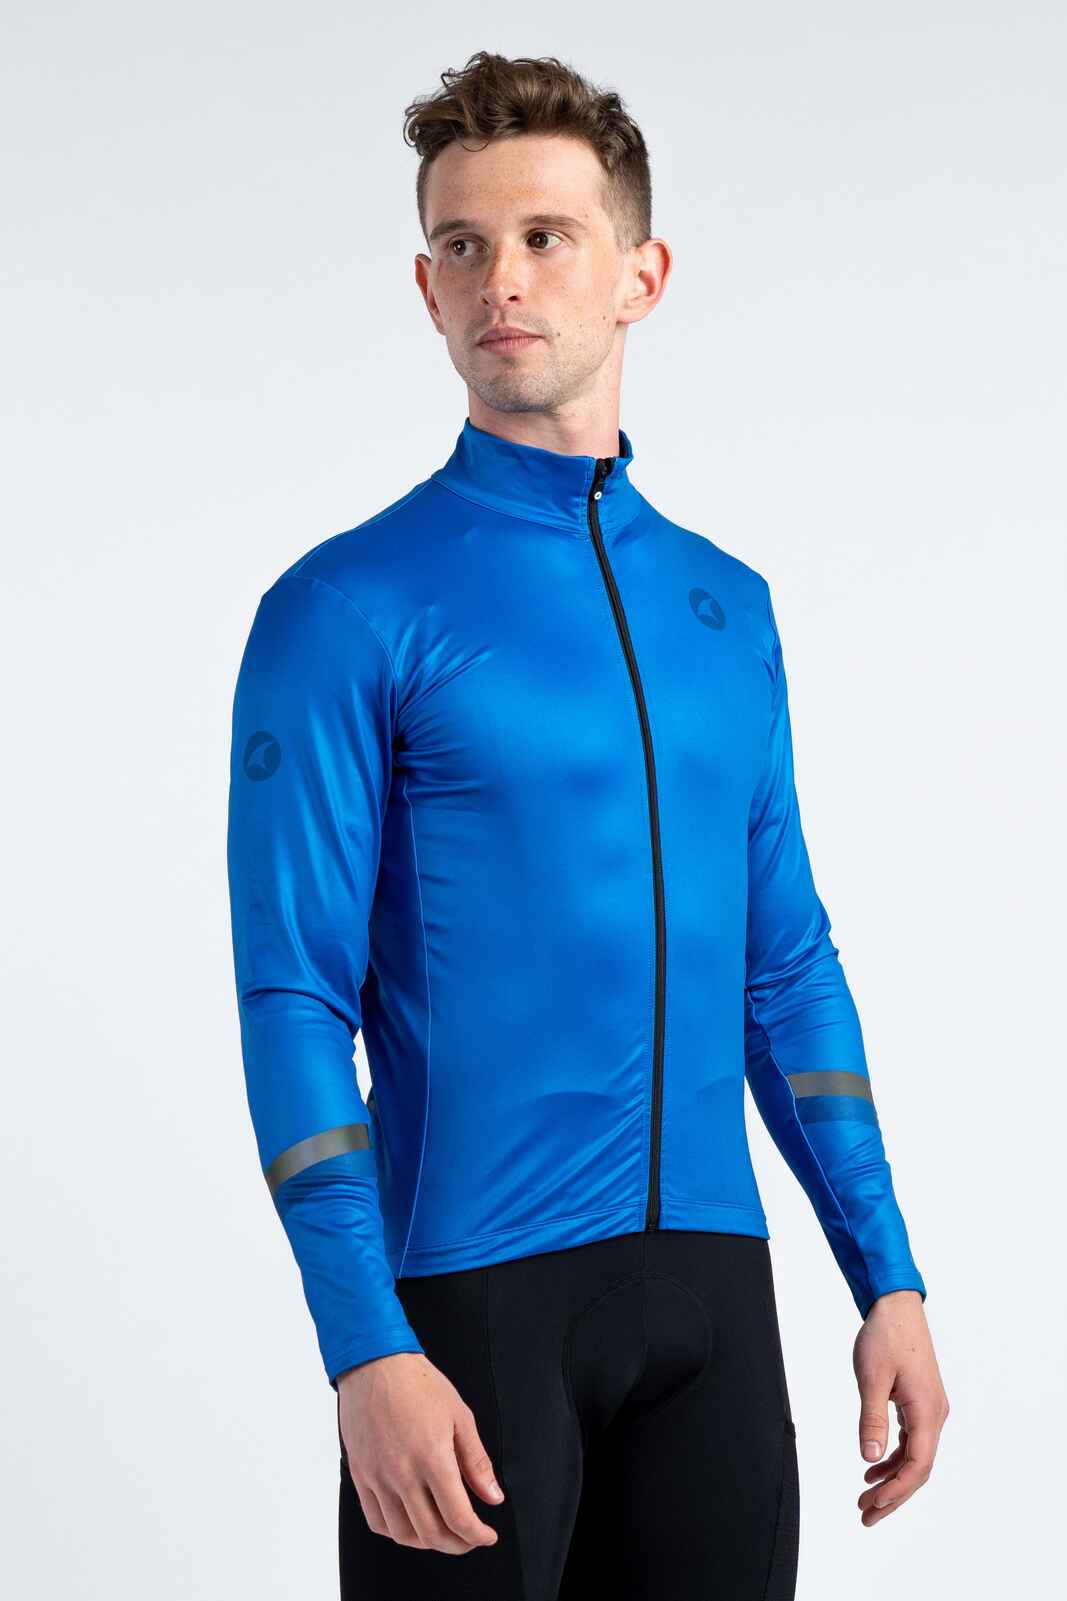 Men's Blue Thermal Cycling Jersey, Cool/Cold Weather